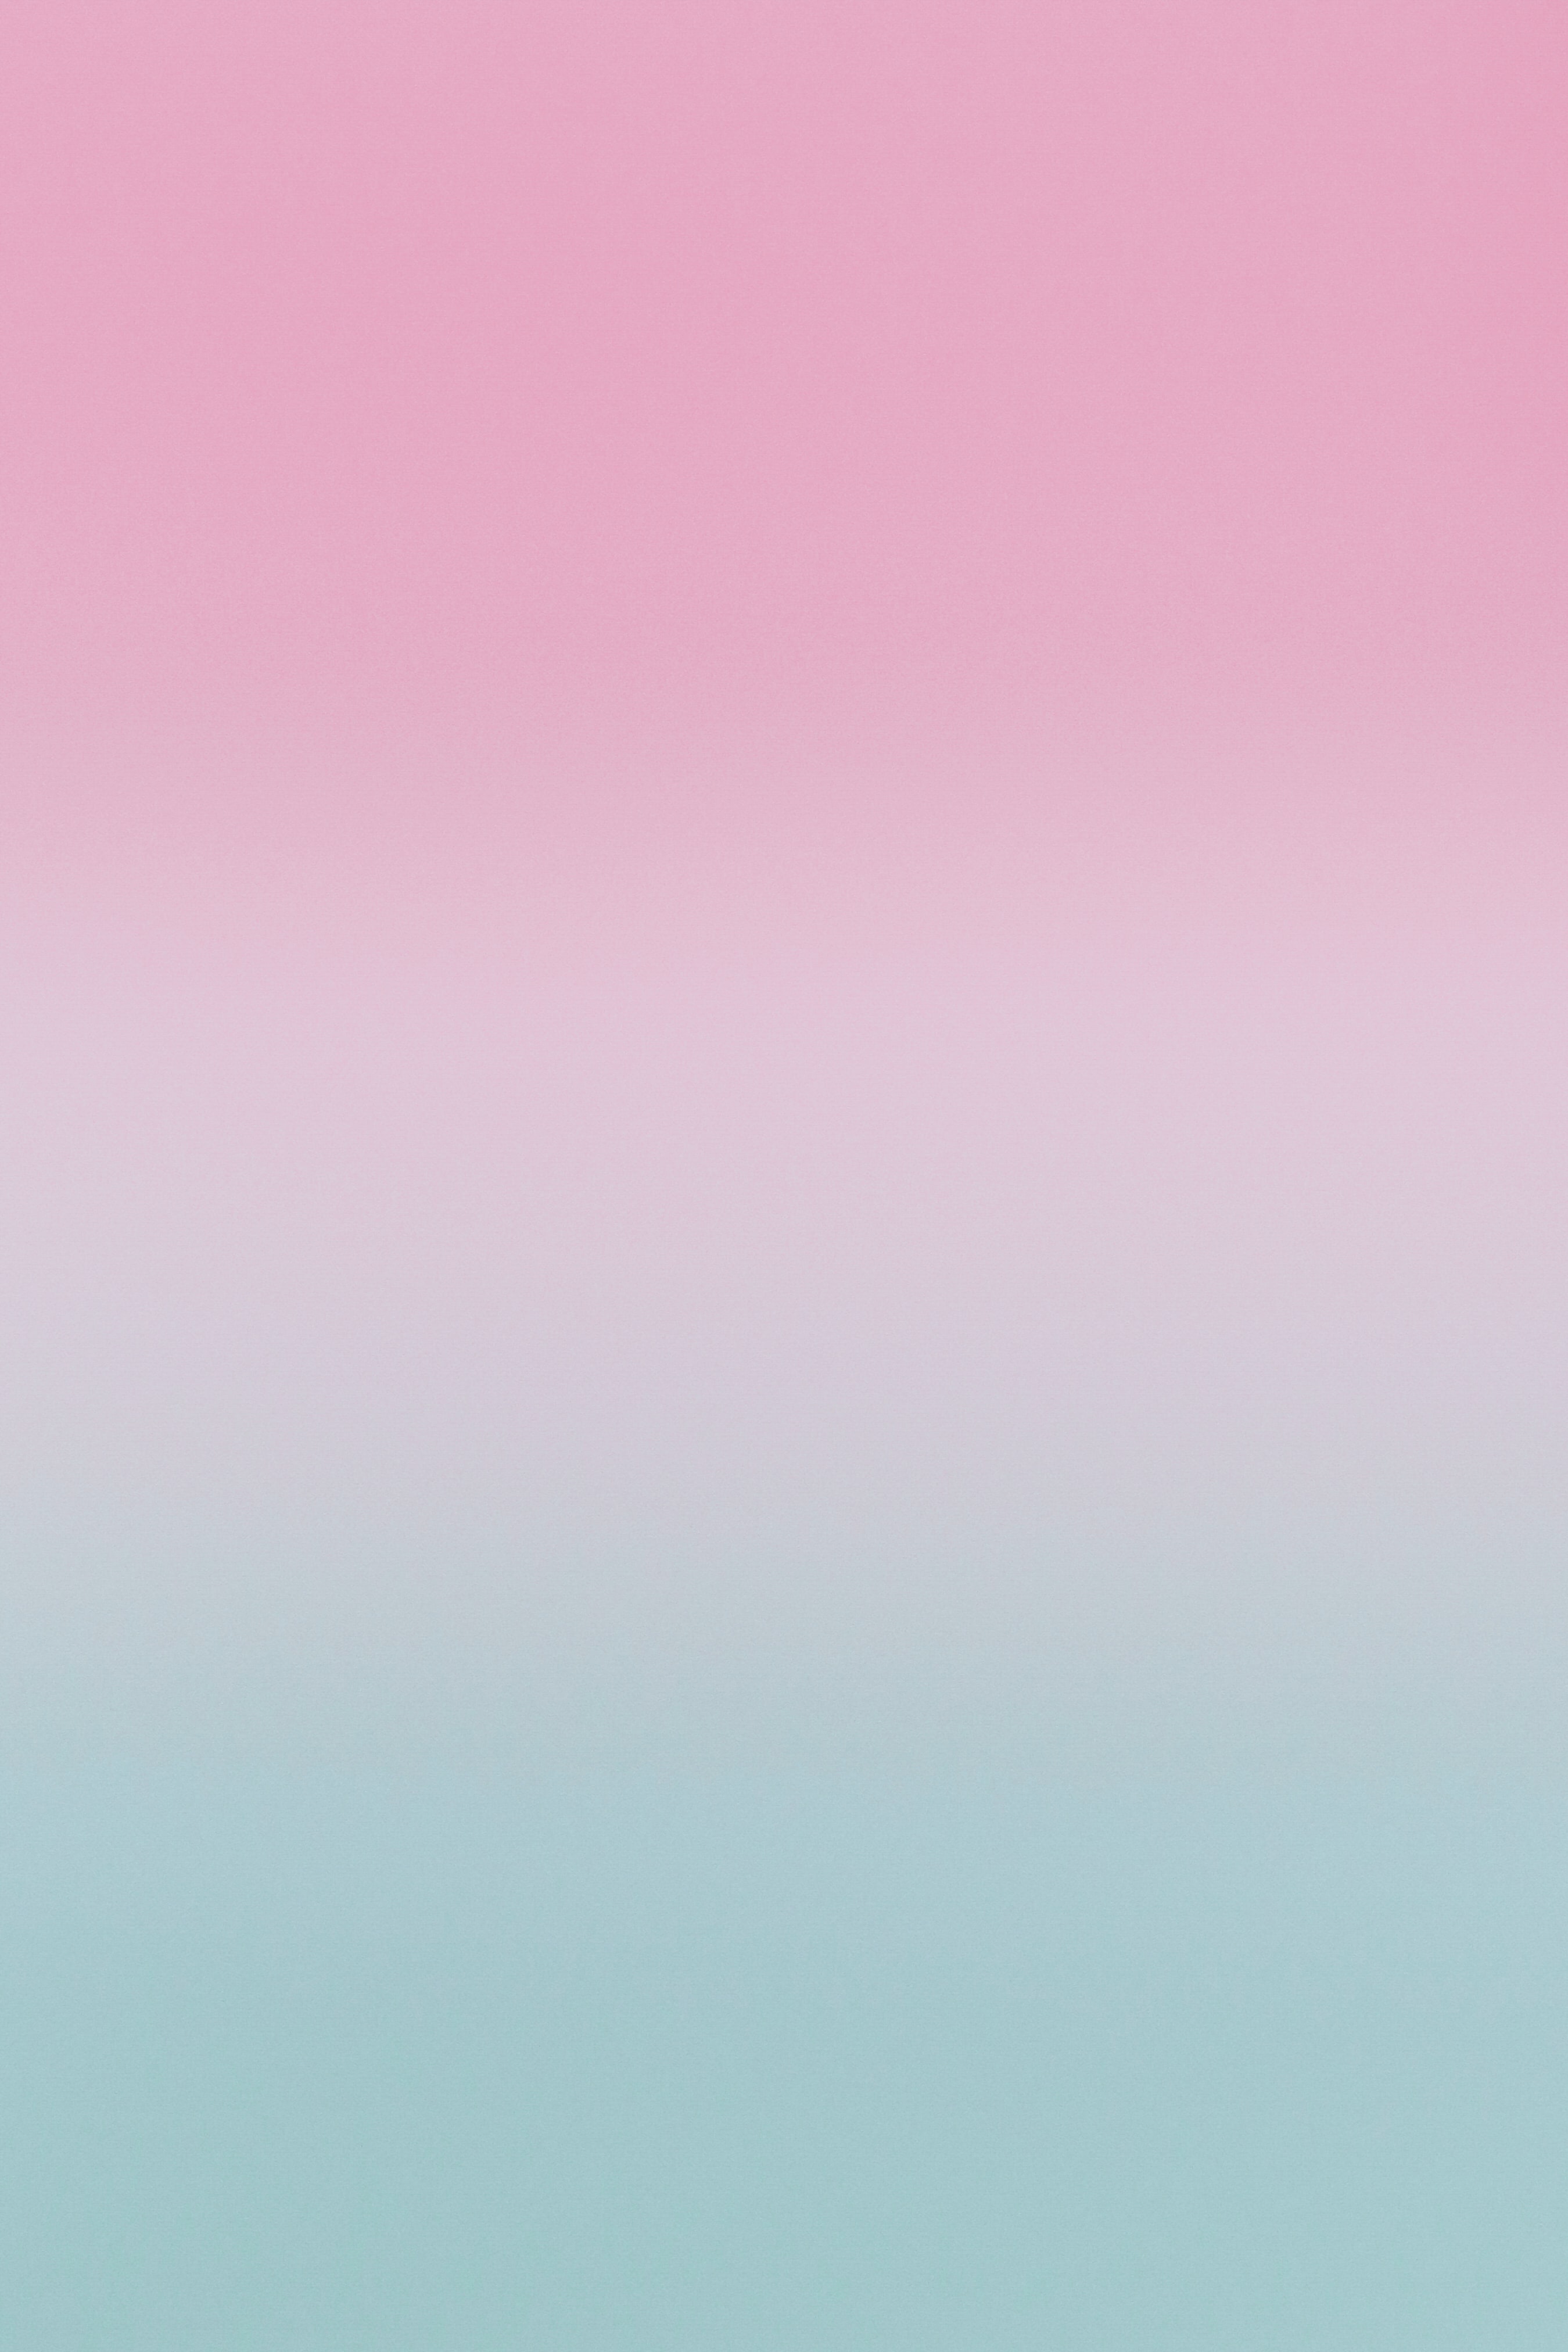 pink, smooth, blur, gradient, blue, abstract